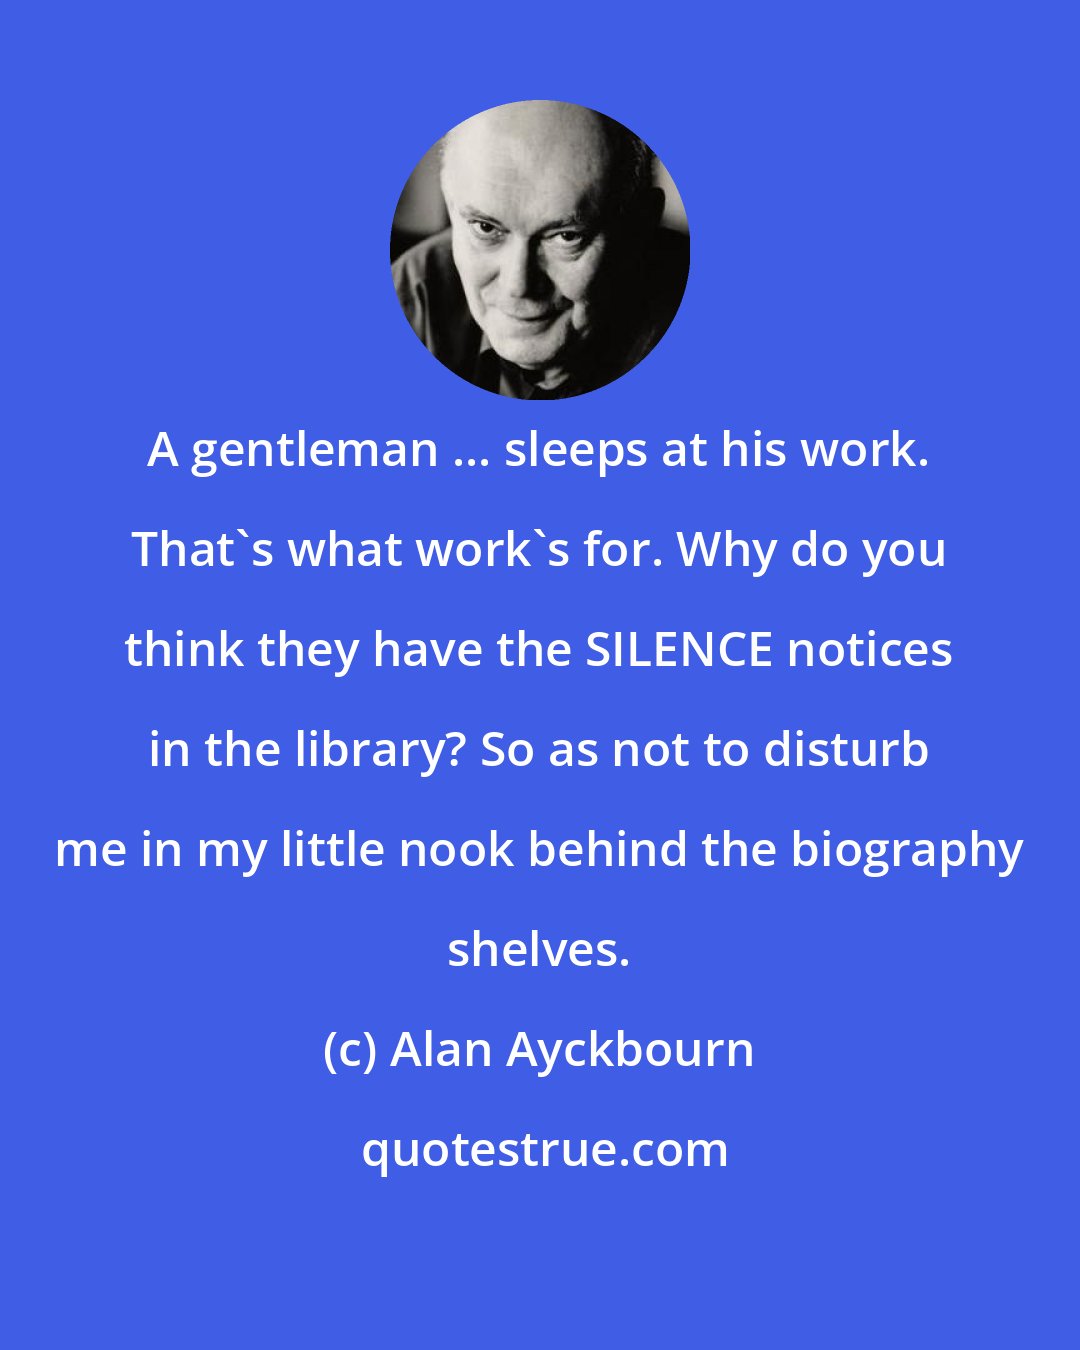 Alan Ayckbourn: A gentleman ... sleeps at his work. That's what work's for. Why do you think they have the SILENCE notices in the library? So as not to disturb me in my little nook behind the biography shelves.